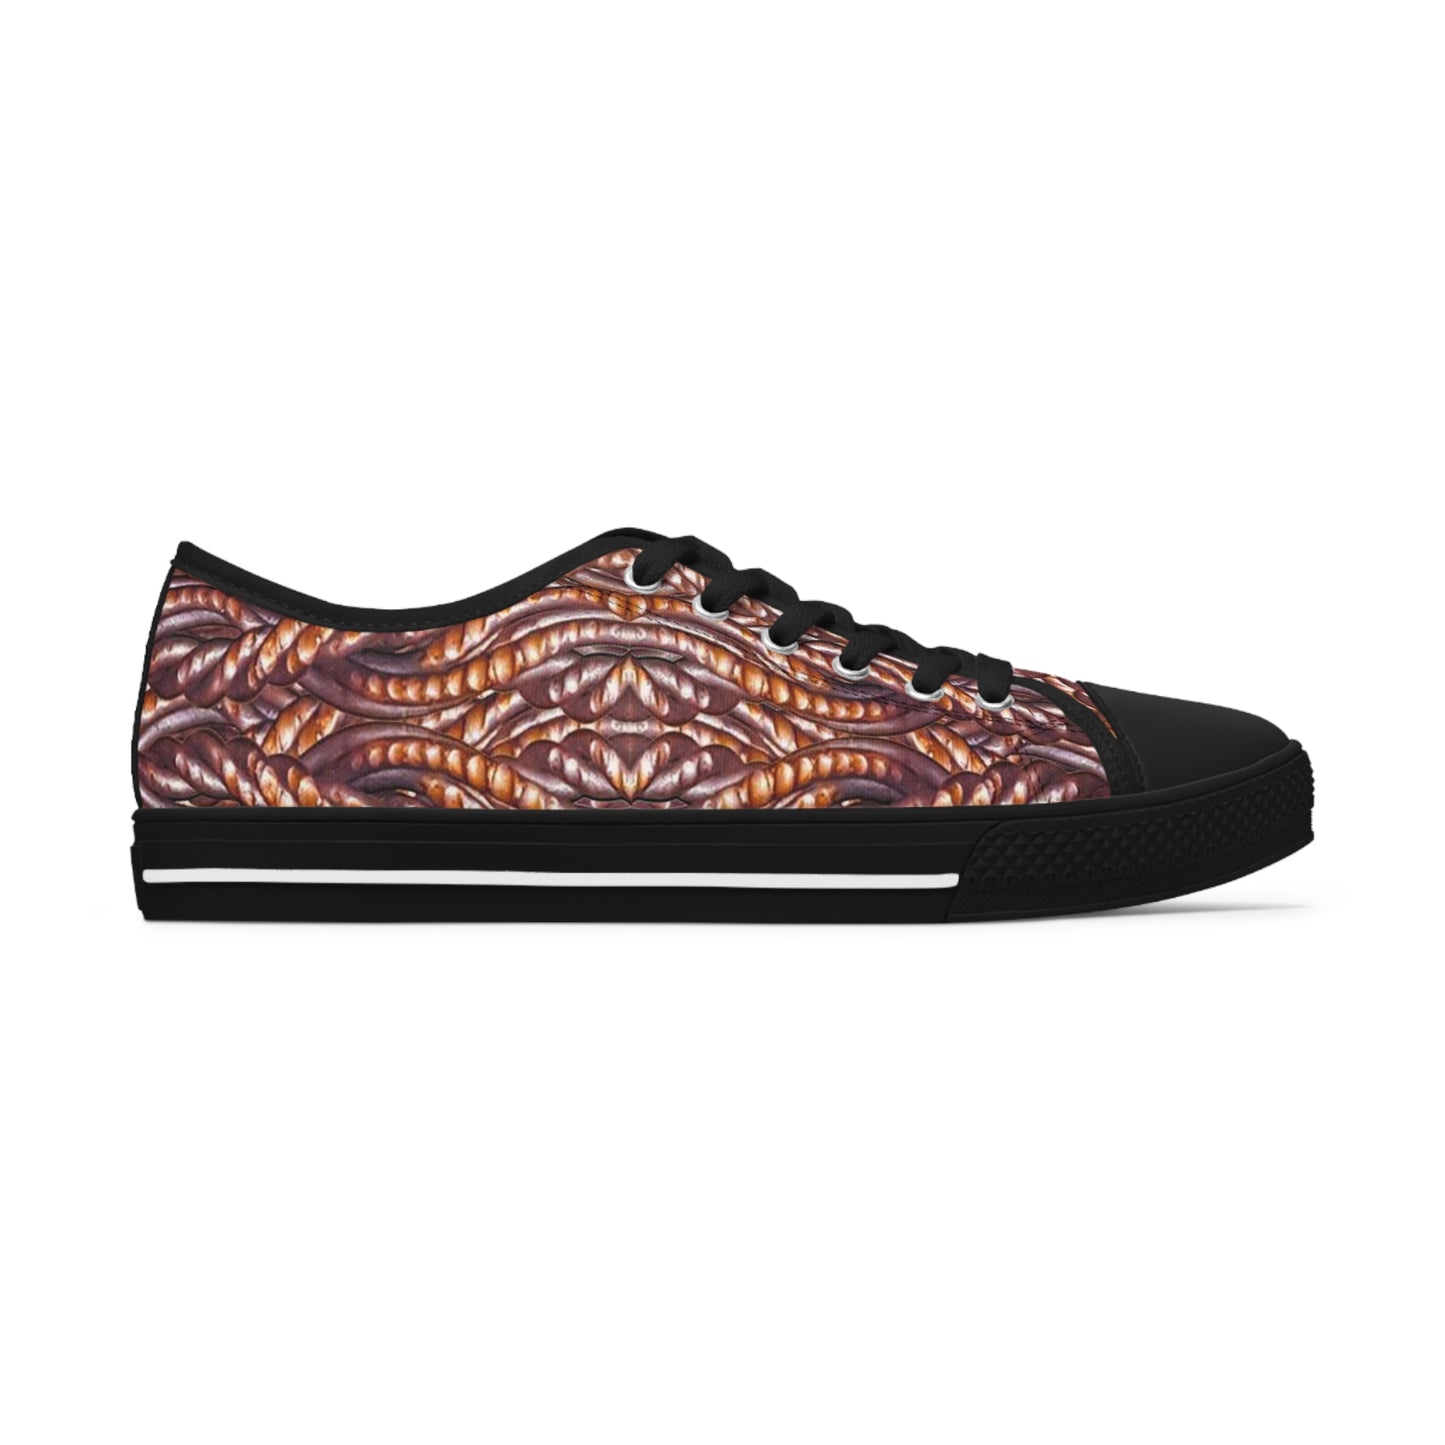 Low Top Sneakers (Her/They)(Grail Hearth Core Copper Fabric) RJSTHs2023 RJS